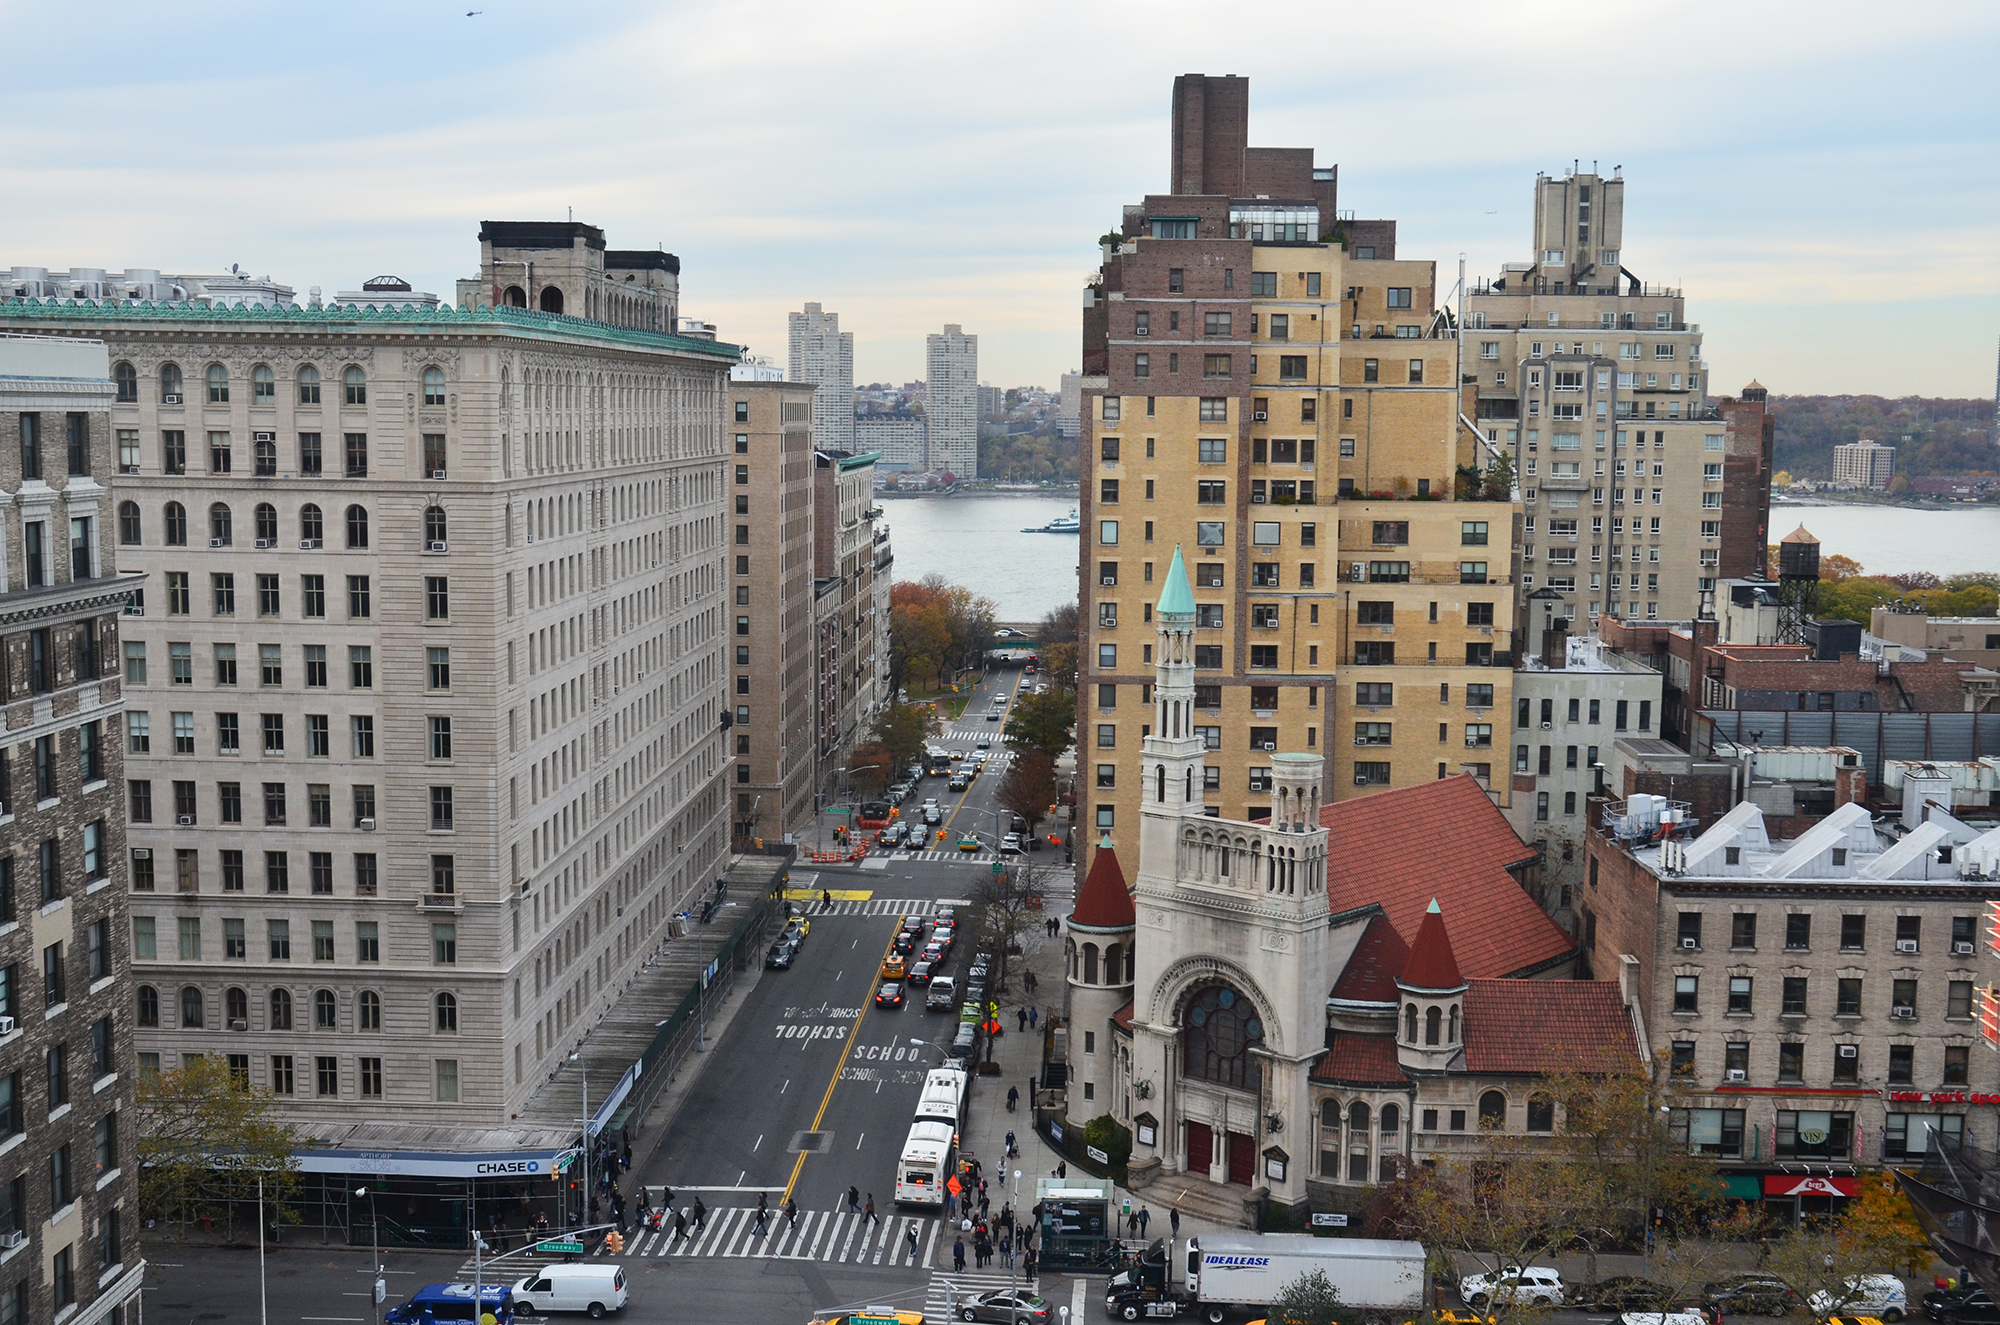 Looking down West 79th Street towards the Hudson River from the top of 207W79. All photos by Evan Bindelglass